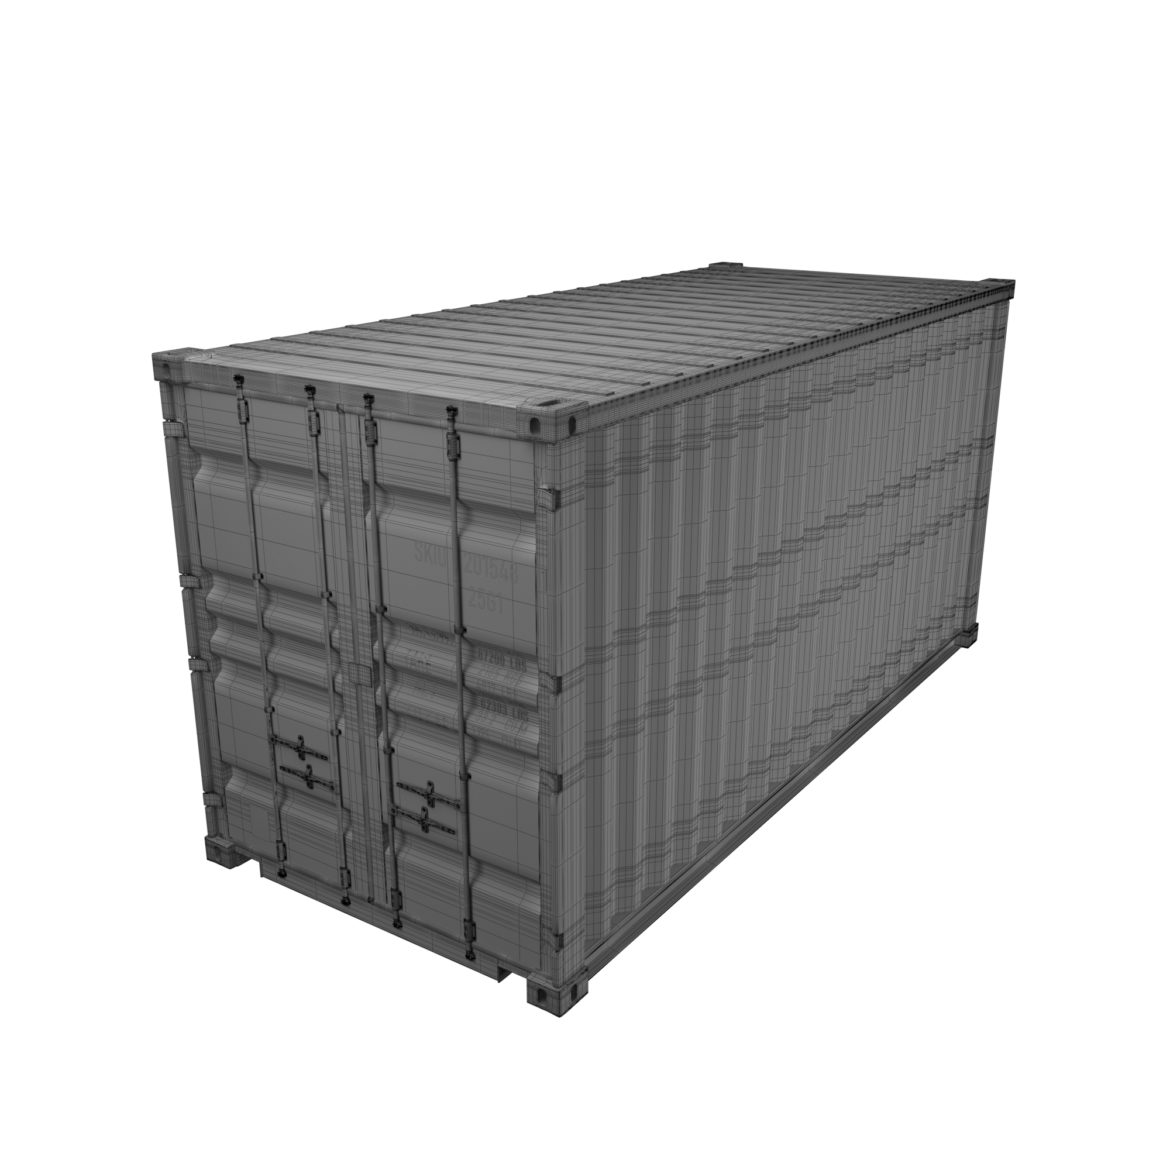  <a class="continue" href="https://www.flatpyramid.com/3d-models/architecture-3d-models/objects/container/shipping-containers-20ft-and-40-ft-high-cube/">Continue Reading<span> Shipping Containers-20ft and 40 ft High Cube</span></a>